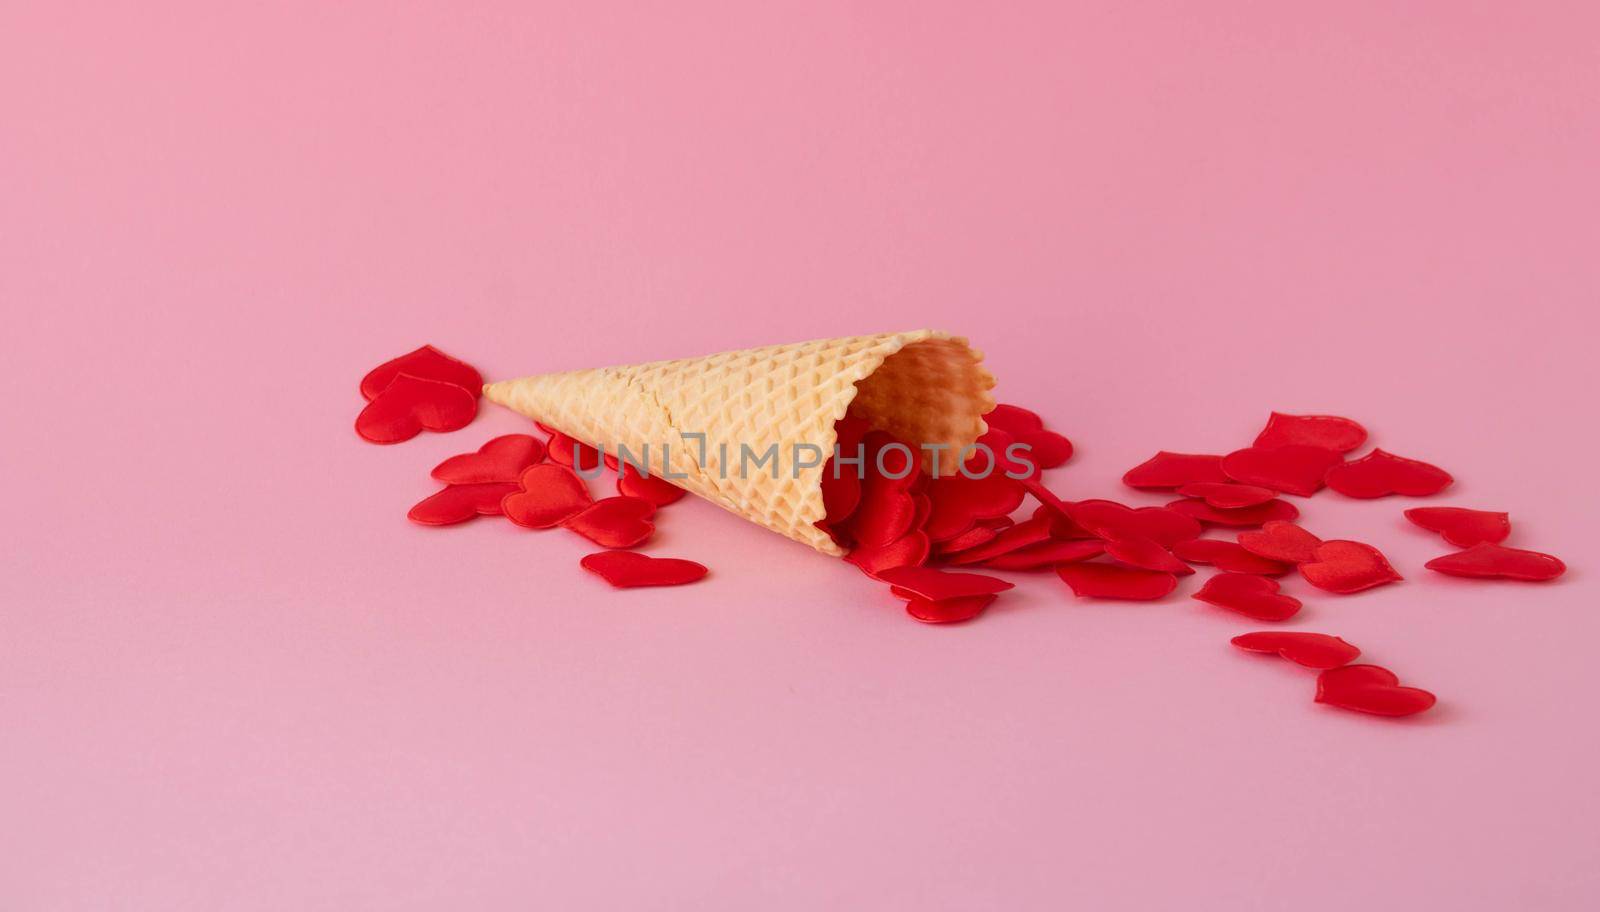 Sweet waffle cone on a pink background with red hearts by lapushka62